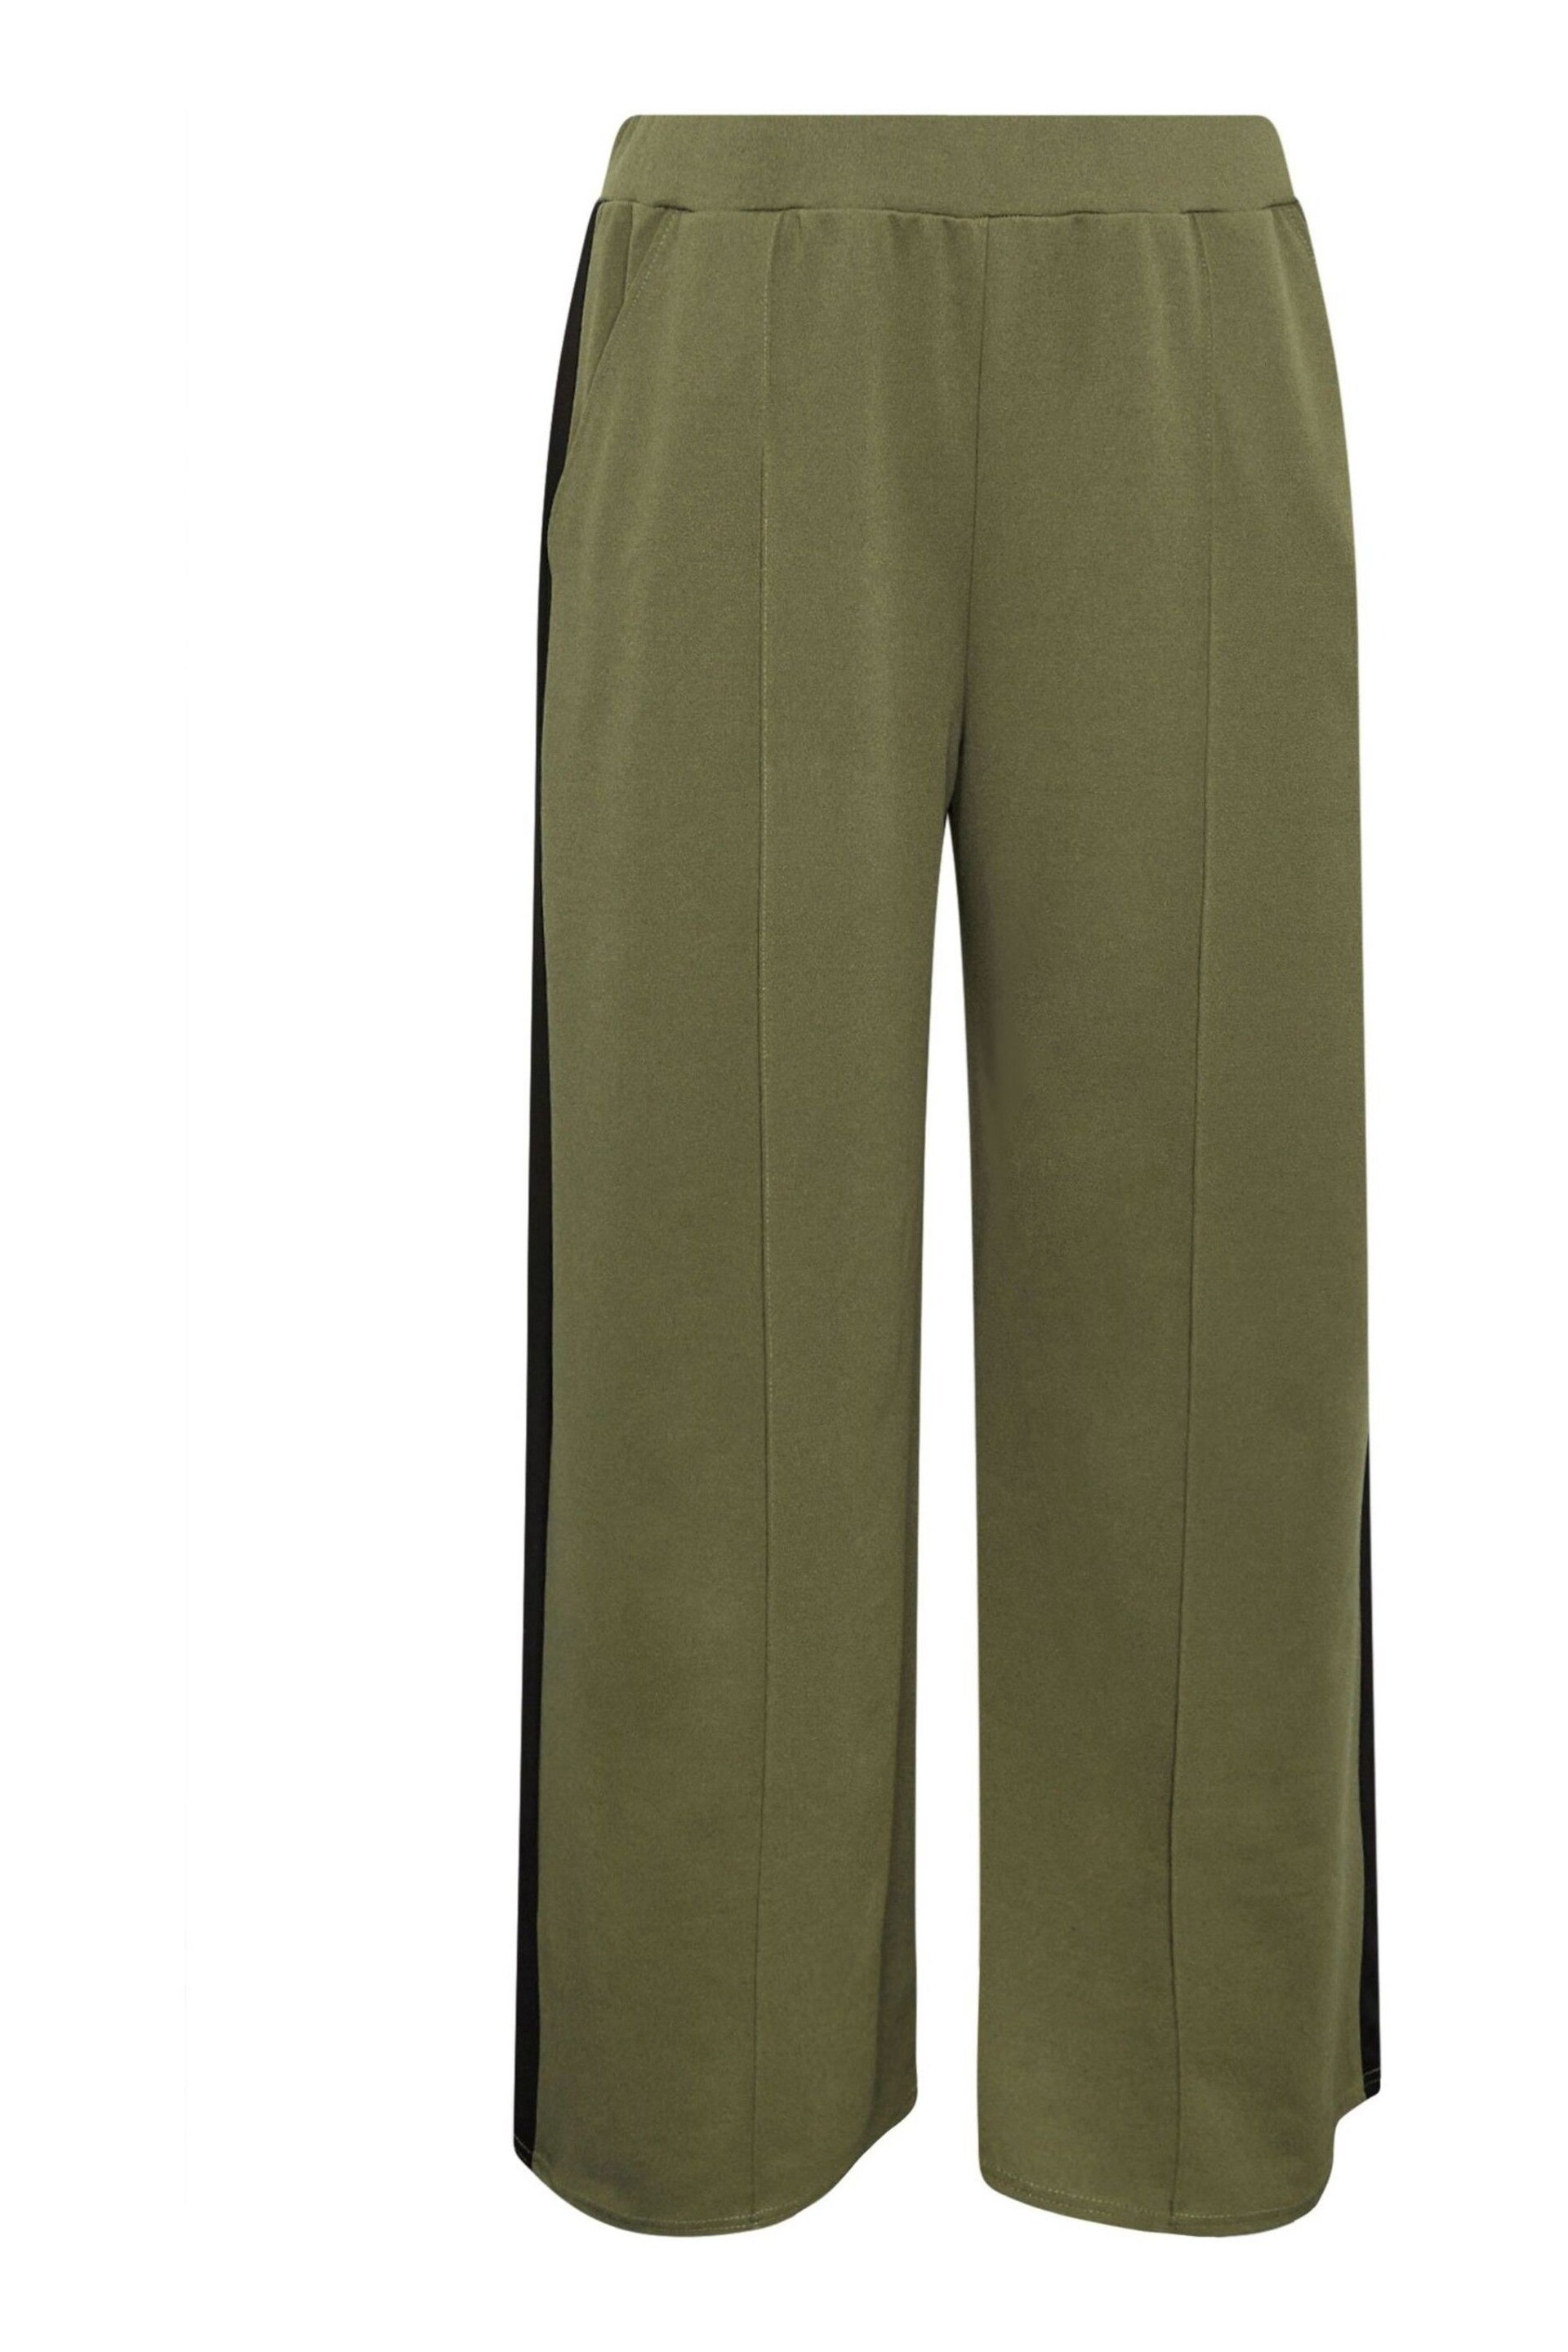 Yours Curve Green Side Stripe Wide Leg Trousers - Image 5 of 5